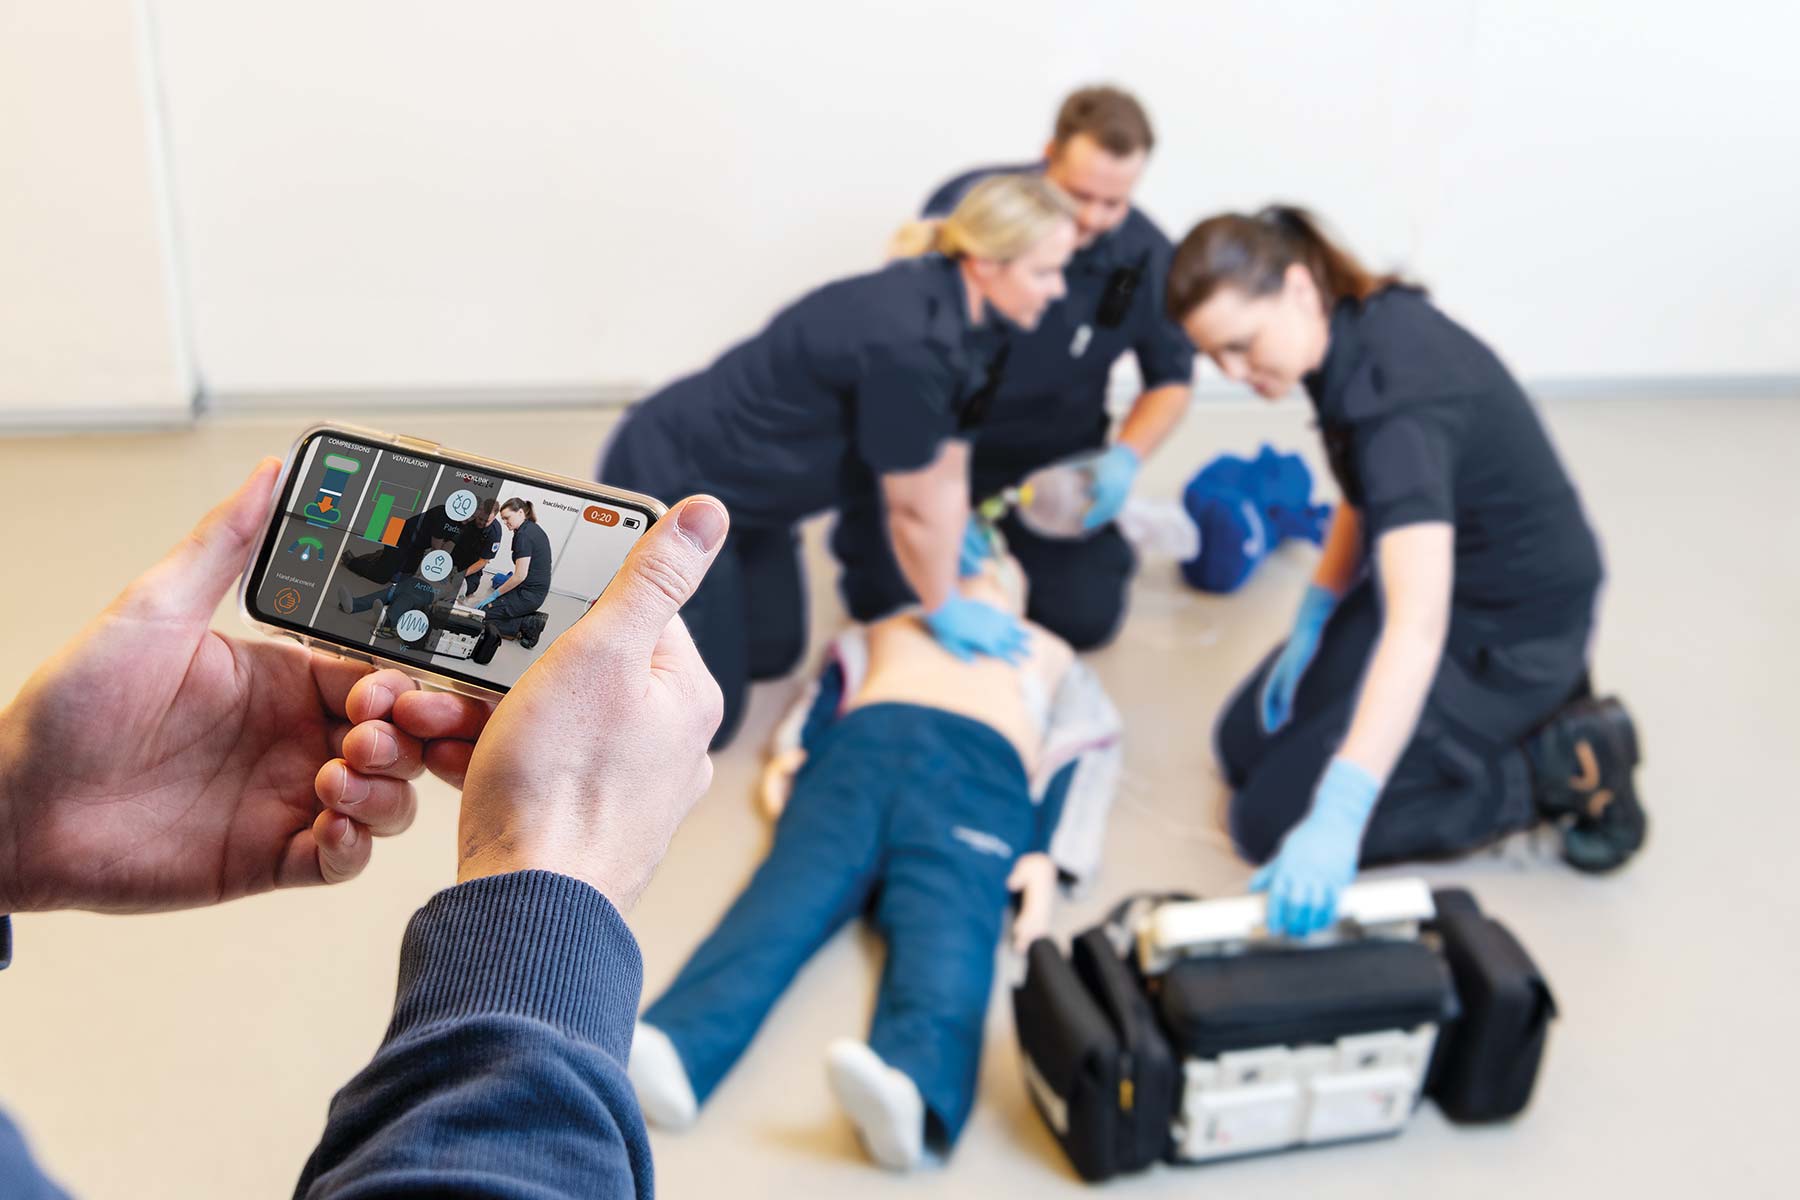 EMTs using teamreporter and performing cpr